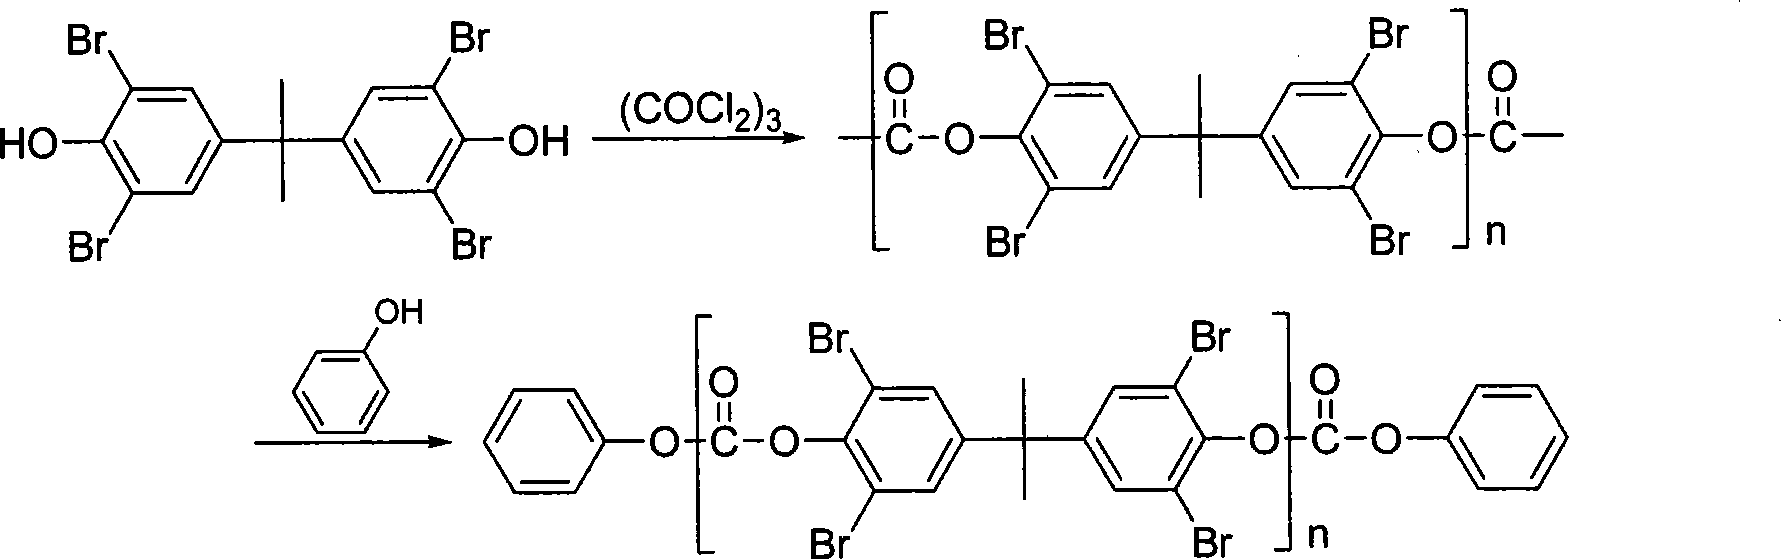 Preparation method for synthesizing brominated polycarbonate